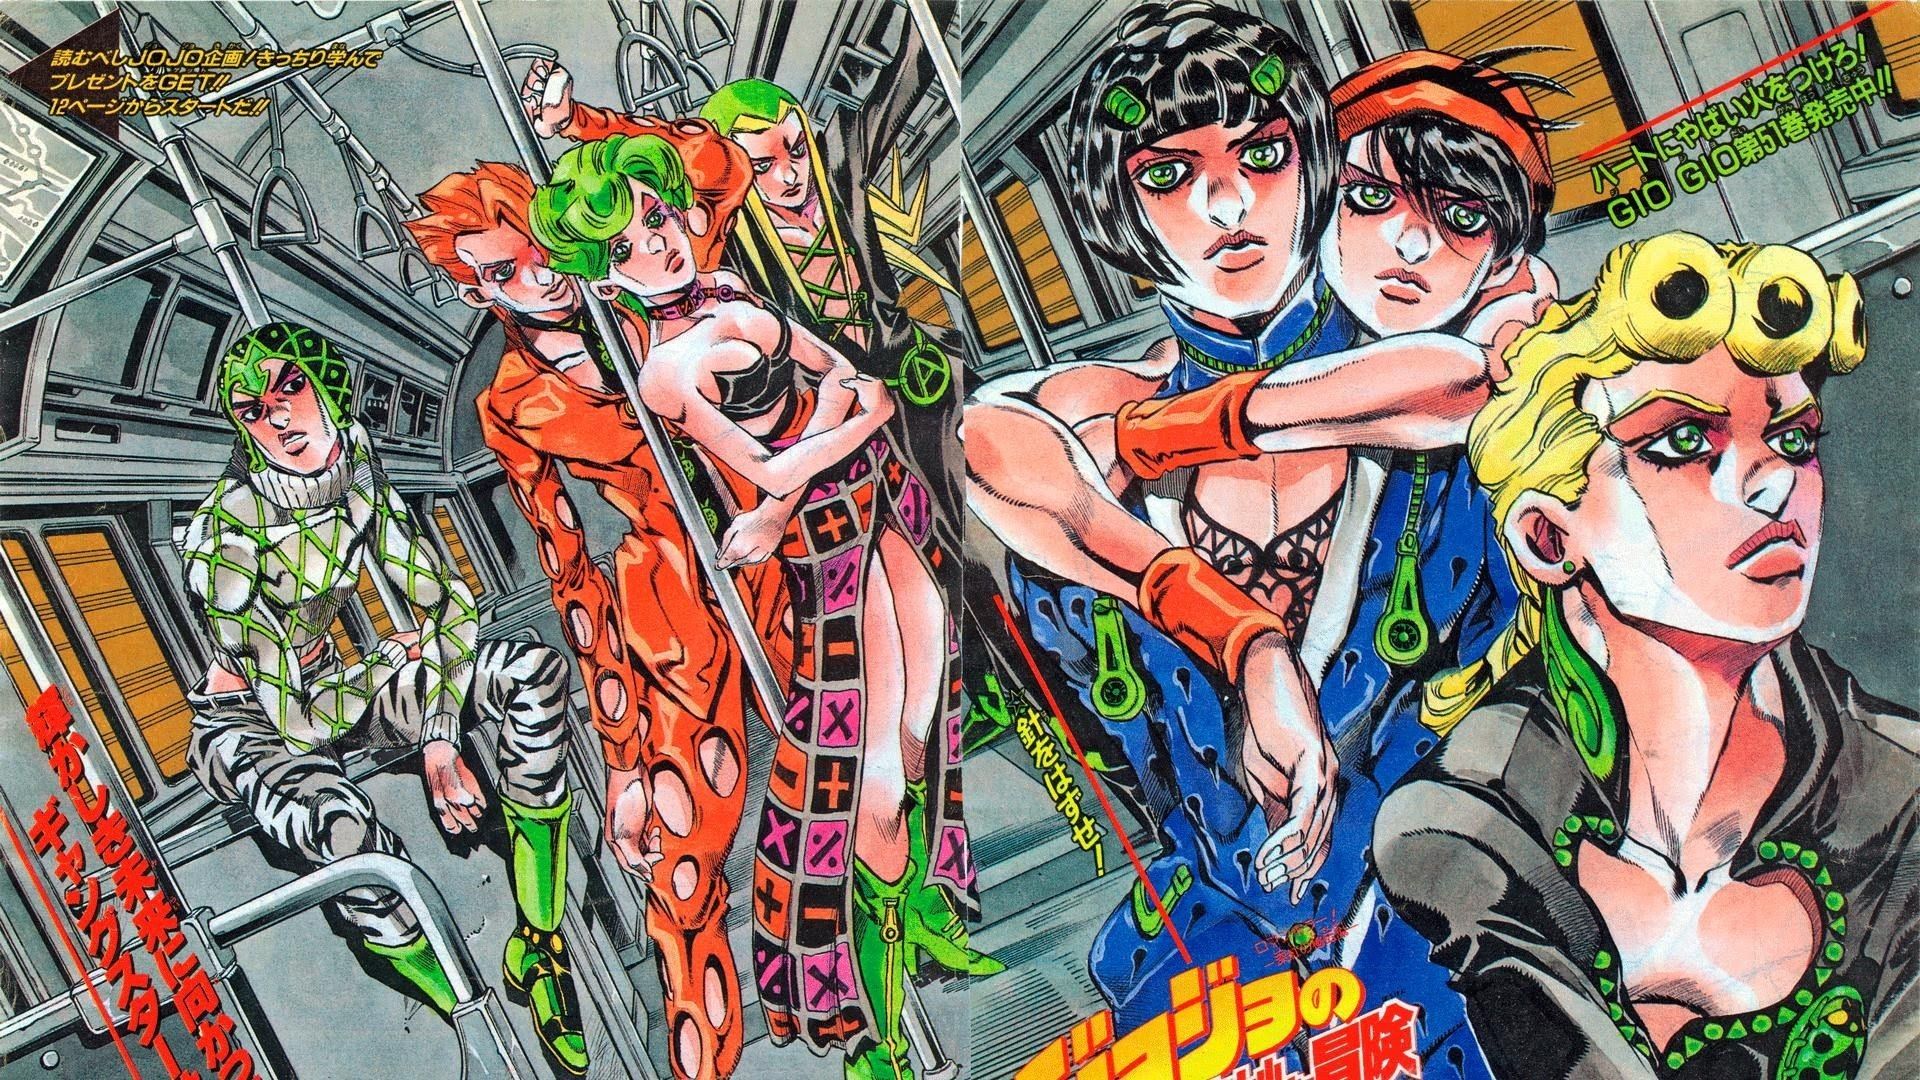 Res Search Results For Vento Aureo Wallpaper